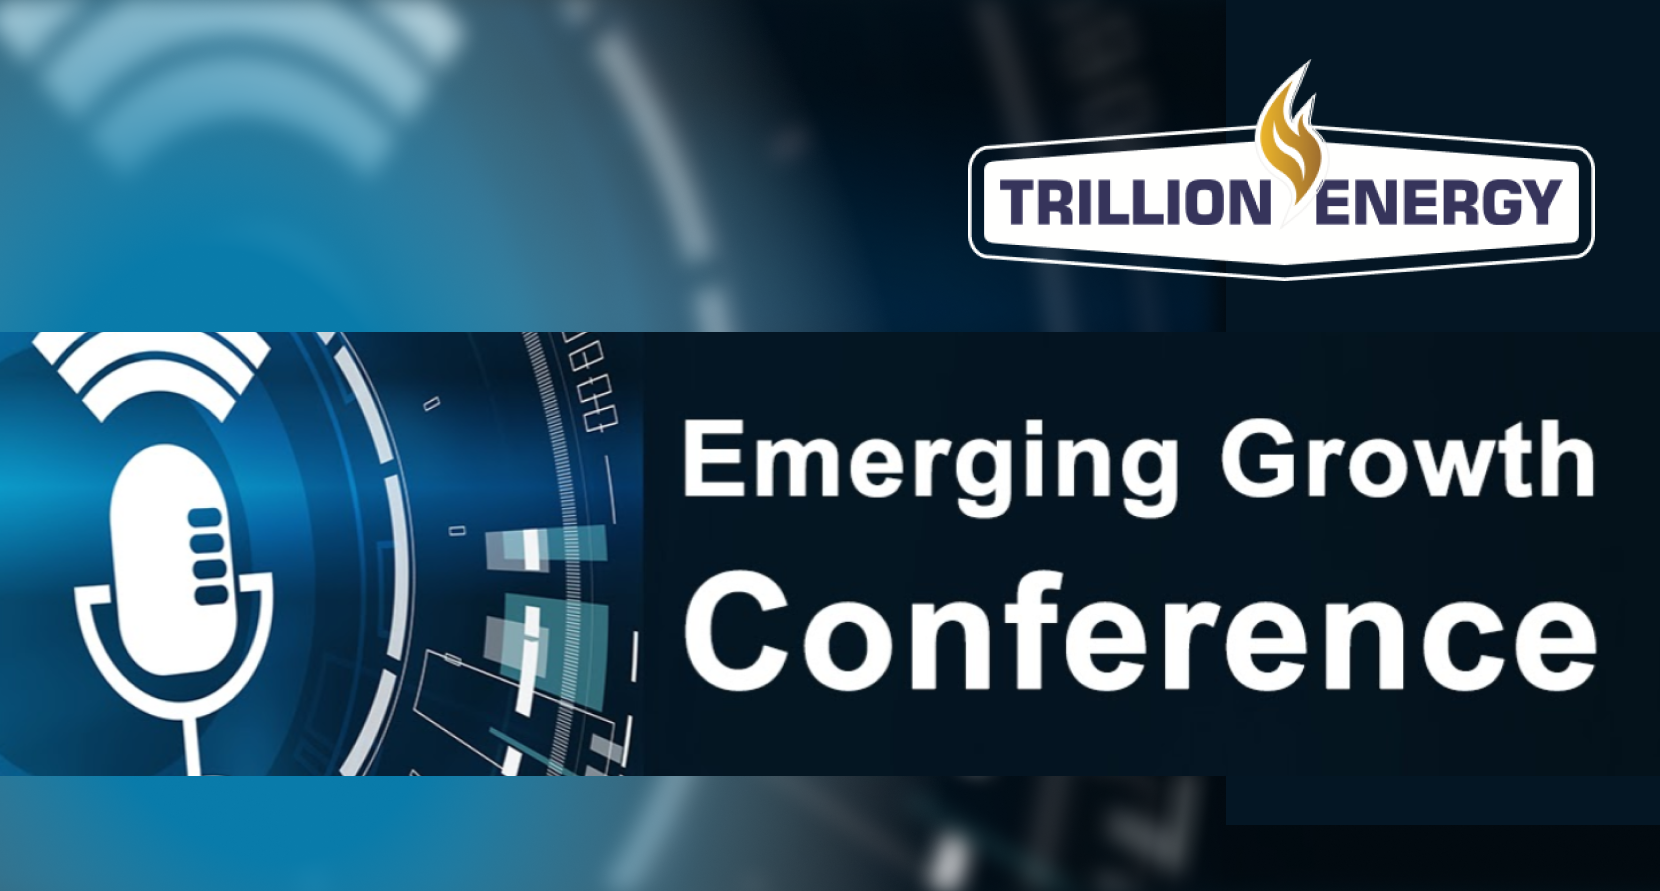 Emerging Growth Conference -  Trillion Energy